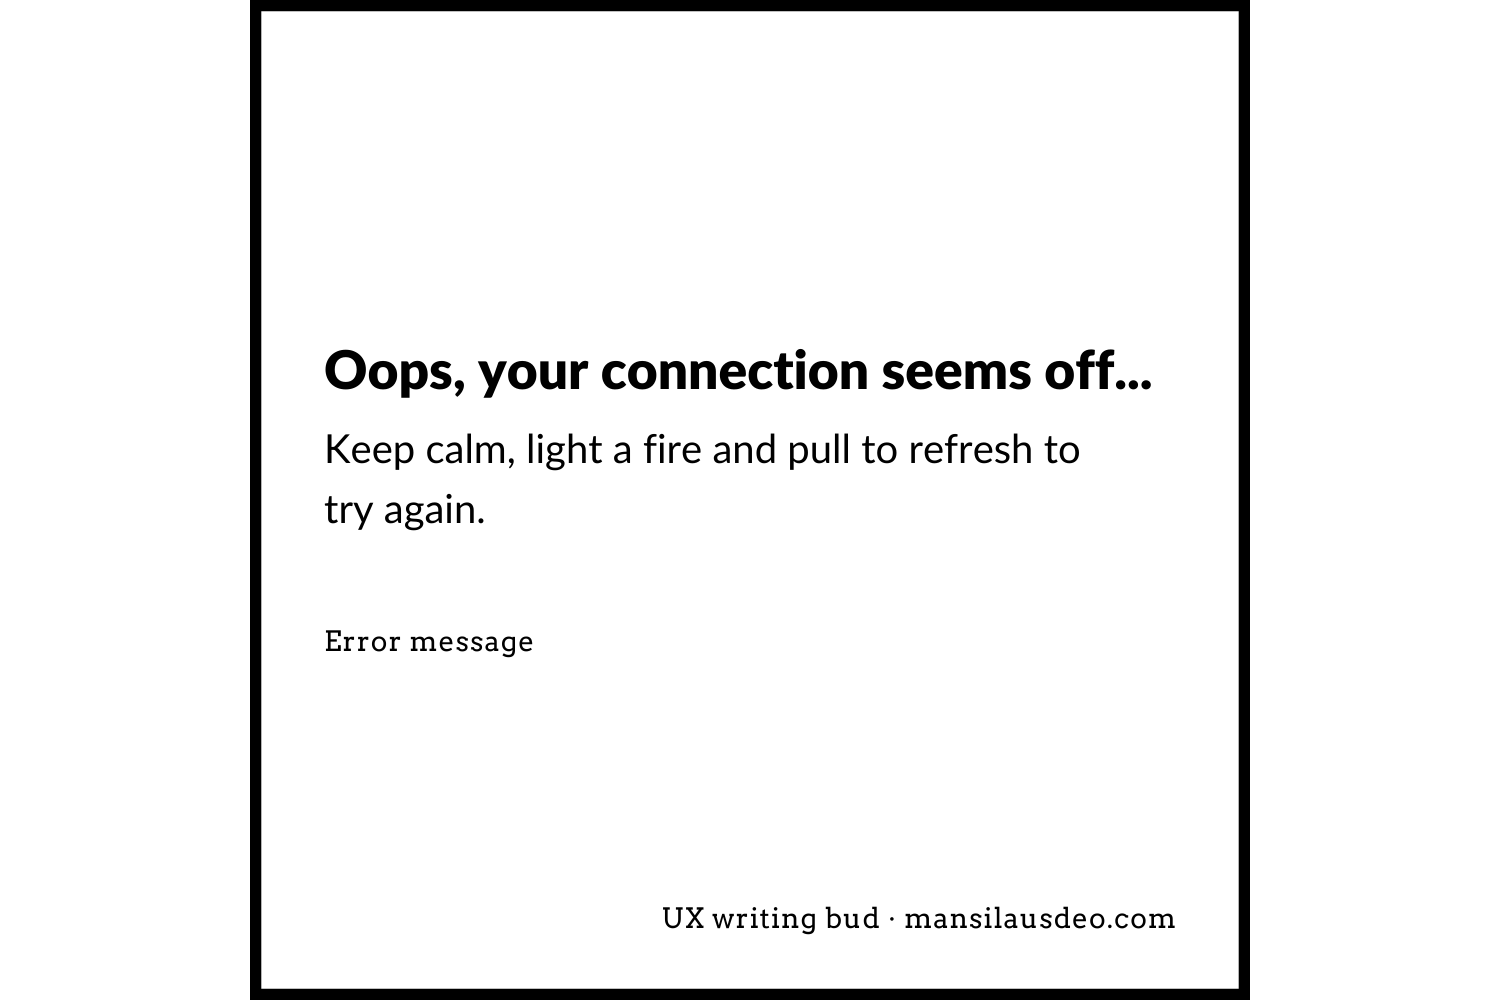 Oops, your connection seems off... Keep calm, light a fire and pull to refresh to try again. Error message UX writing bud